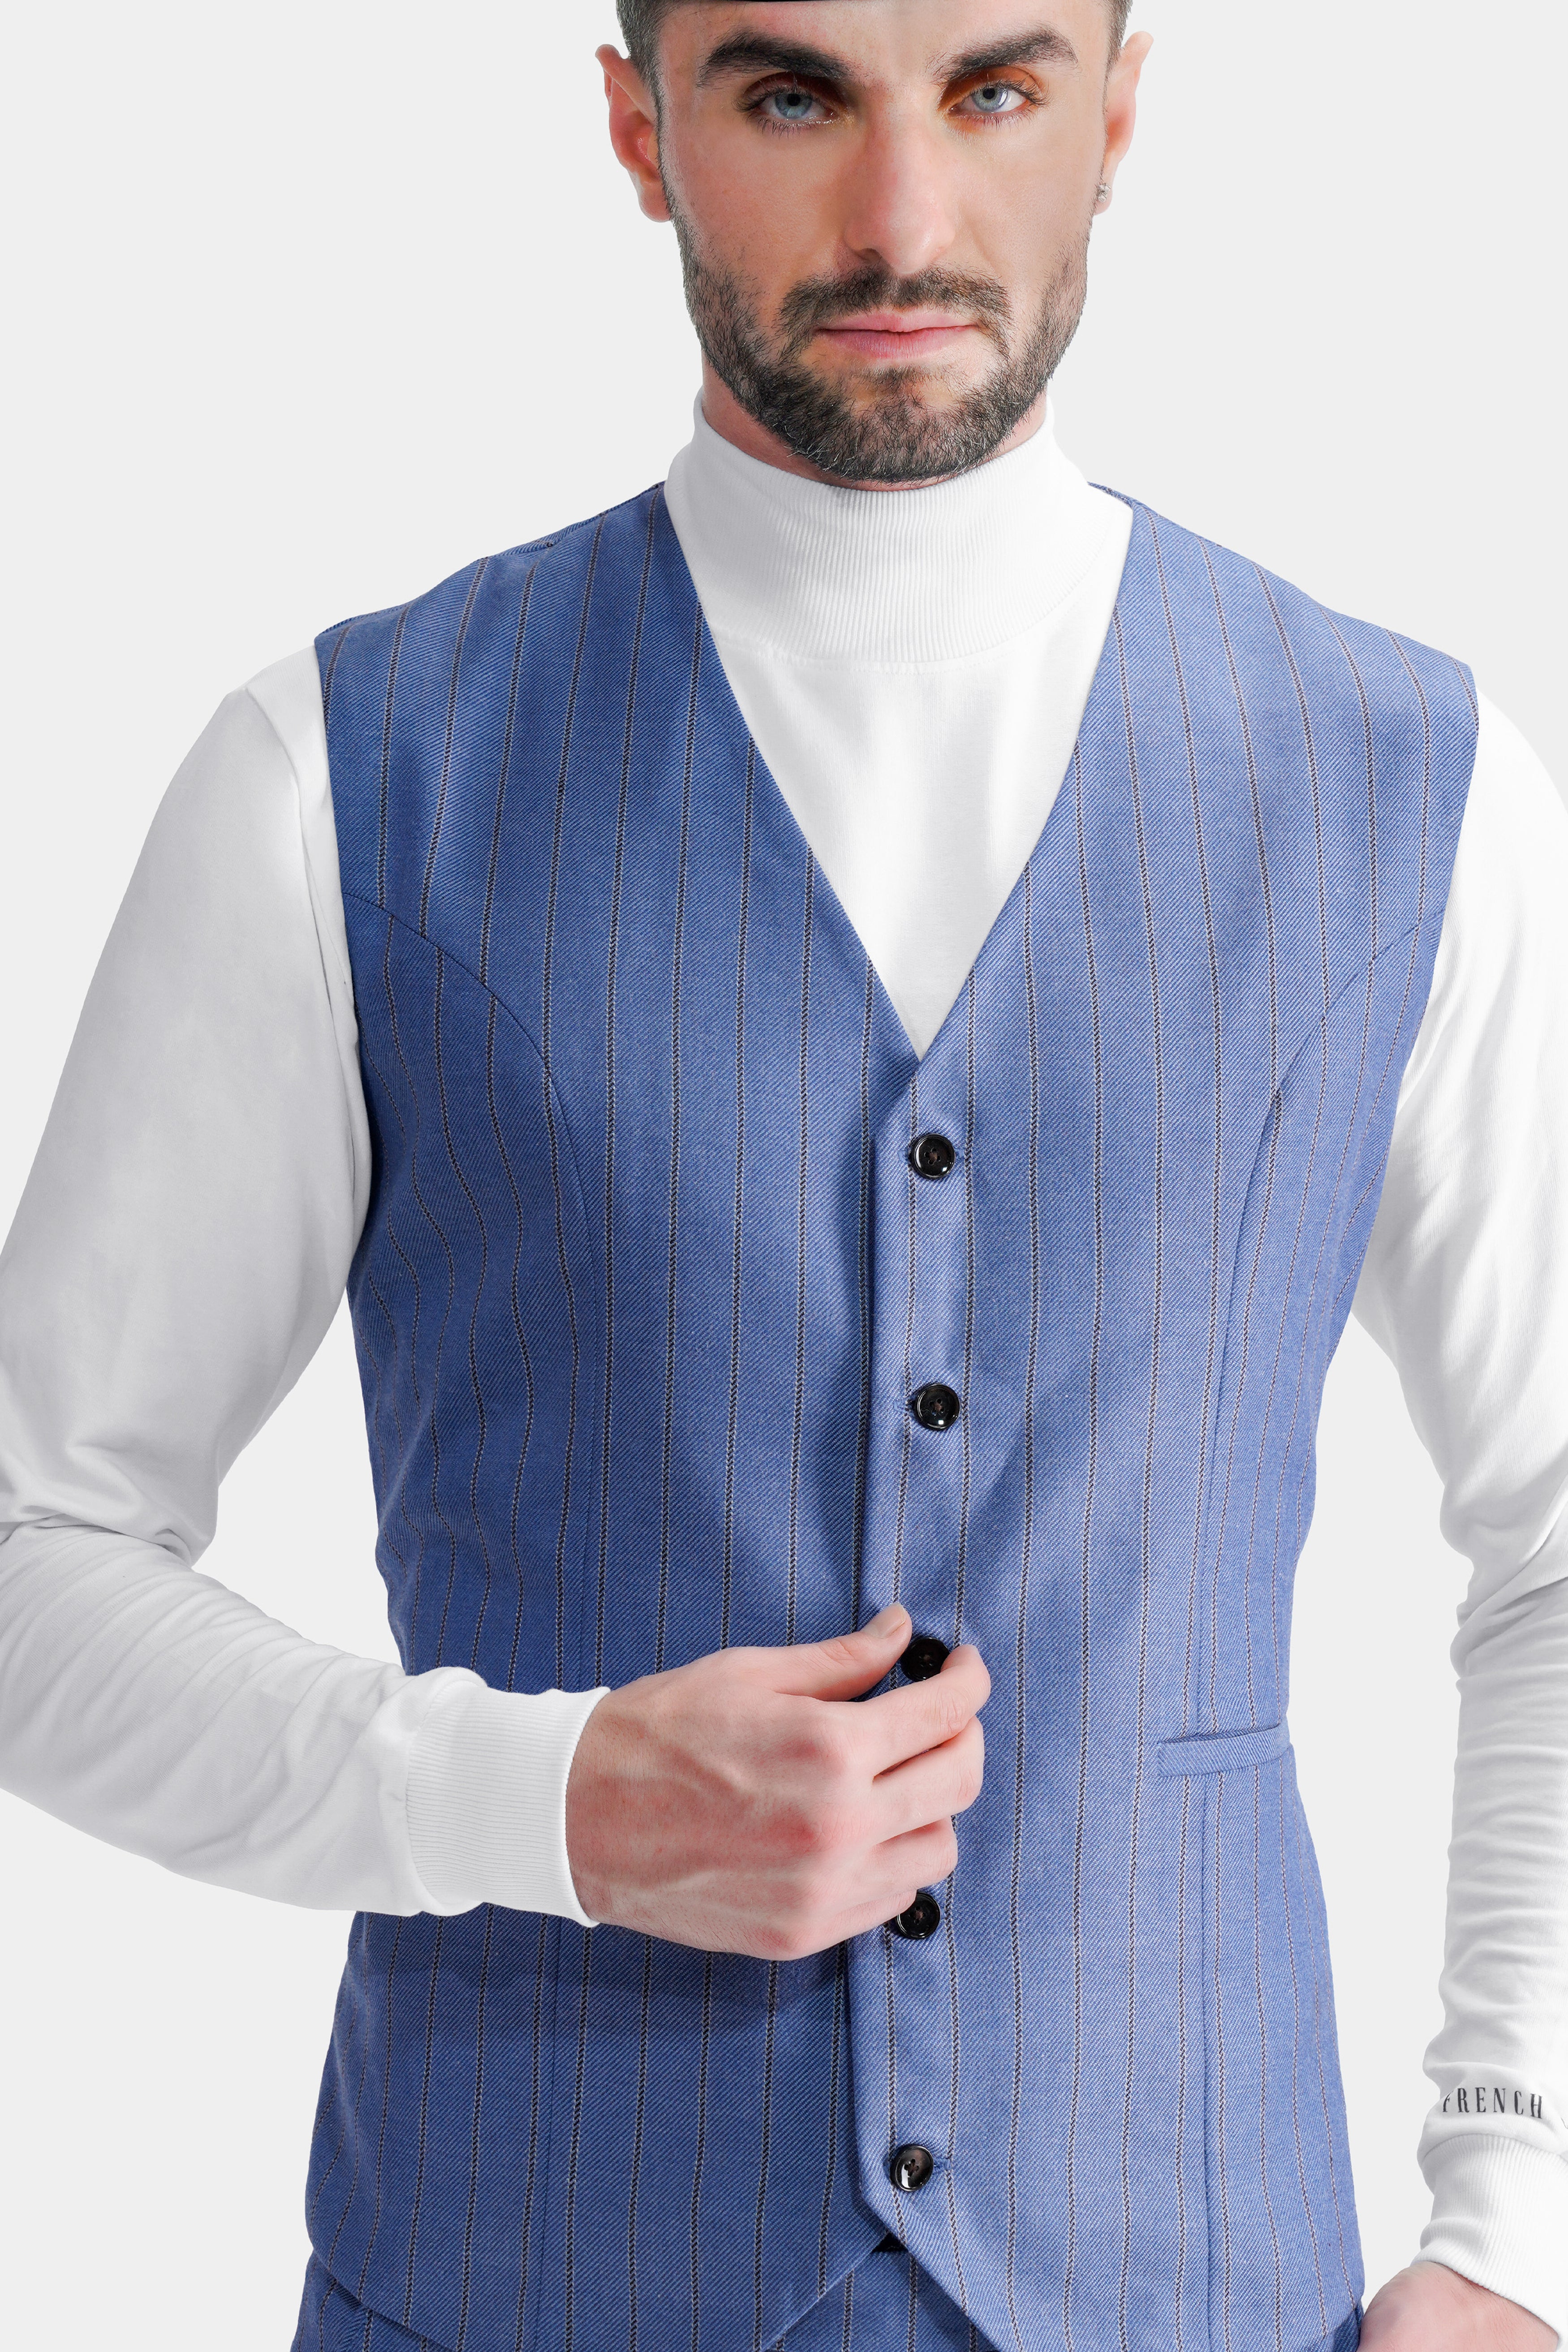 Chetwode Blue and Iroko Brown Striped Wool Rich Waistcoat V2769-36, V2769-38, V2769-40, V2769-42, V2769-44, V2769-46, V2769-48, V2769-50, V2769-52, V2769-54, V2769-56, V2769-58, V2769-60